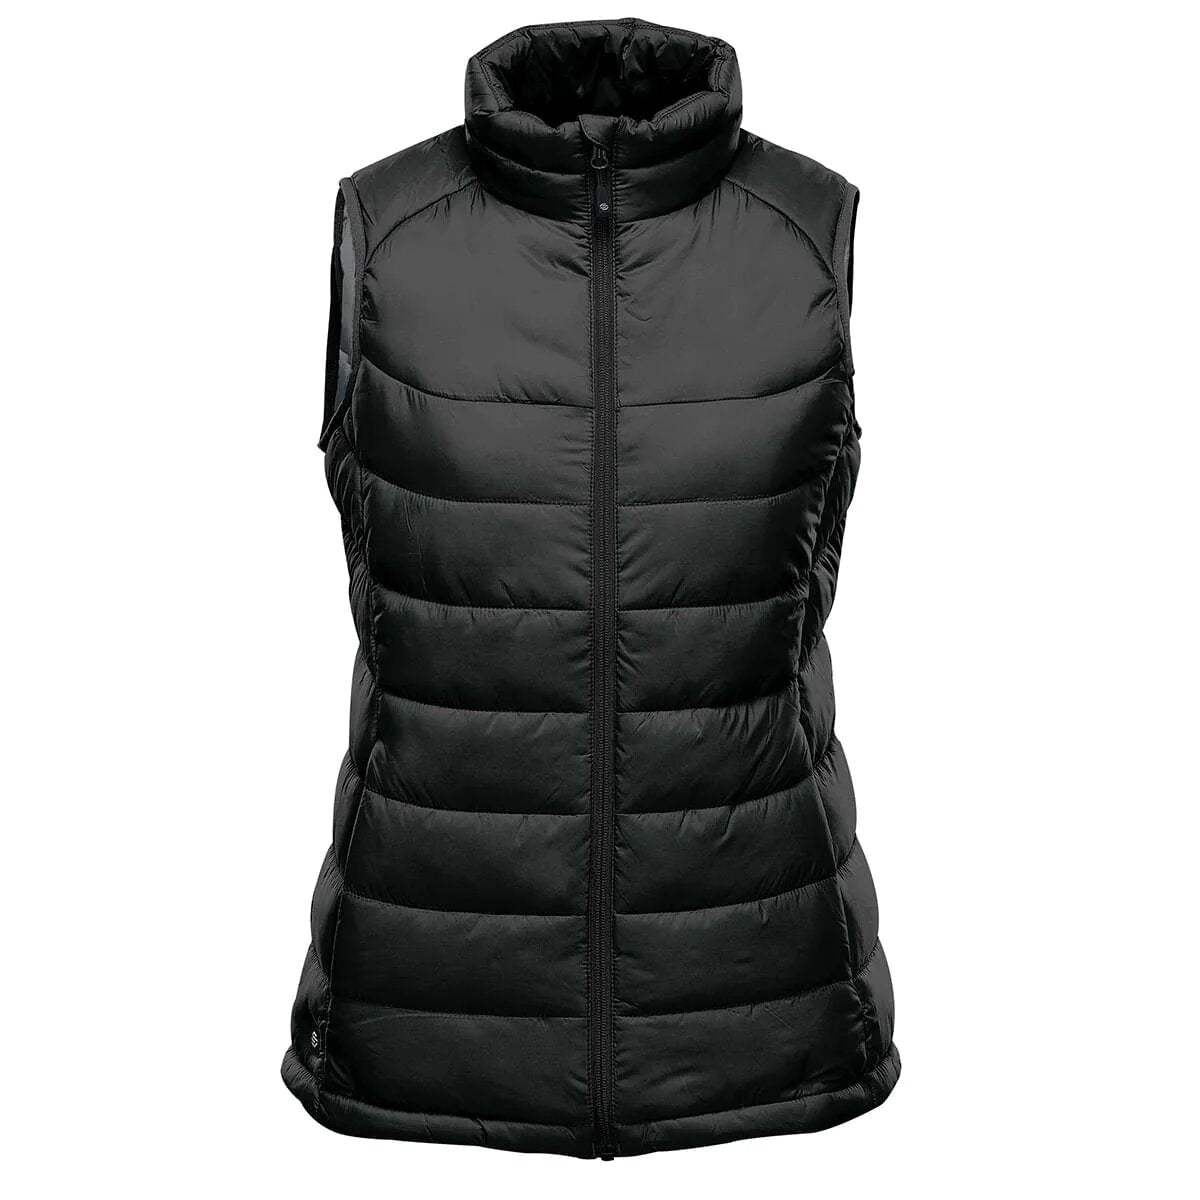 Women’s Stavanger Thermal Vest by Stormtech - Promotions Only Group Limited